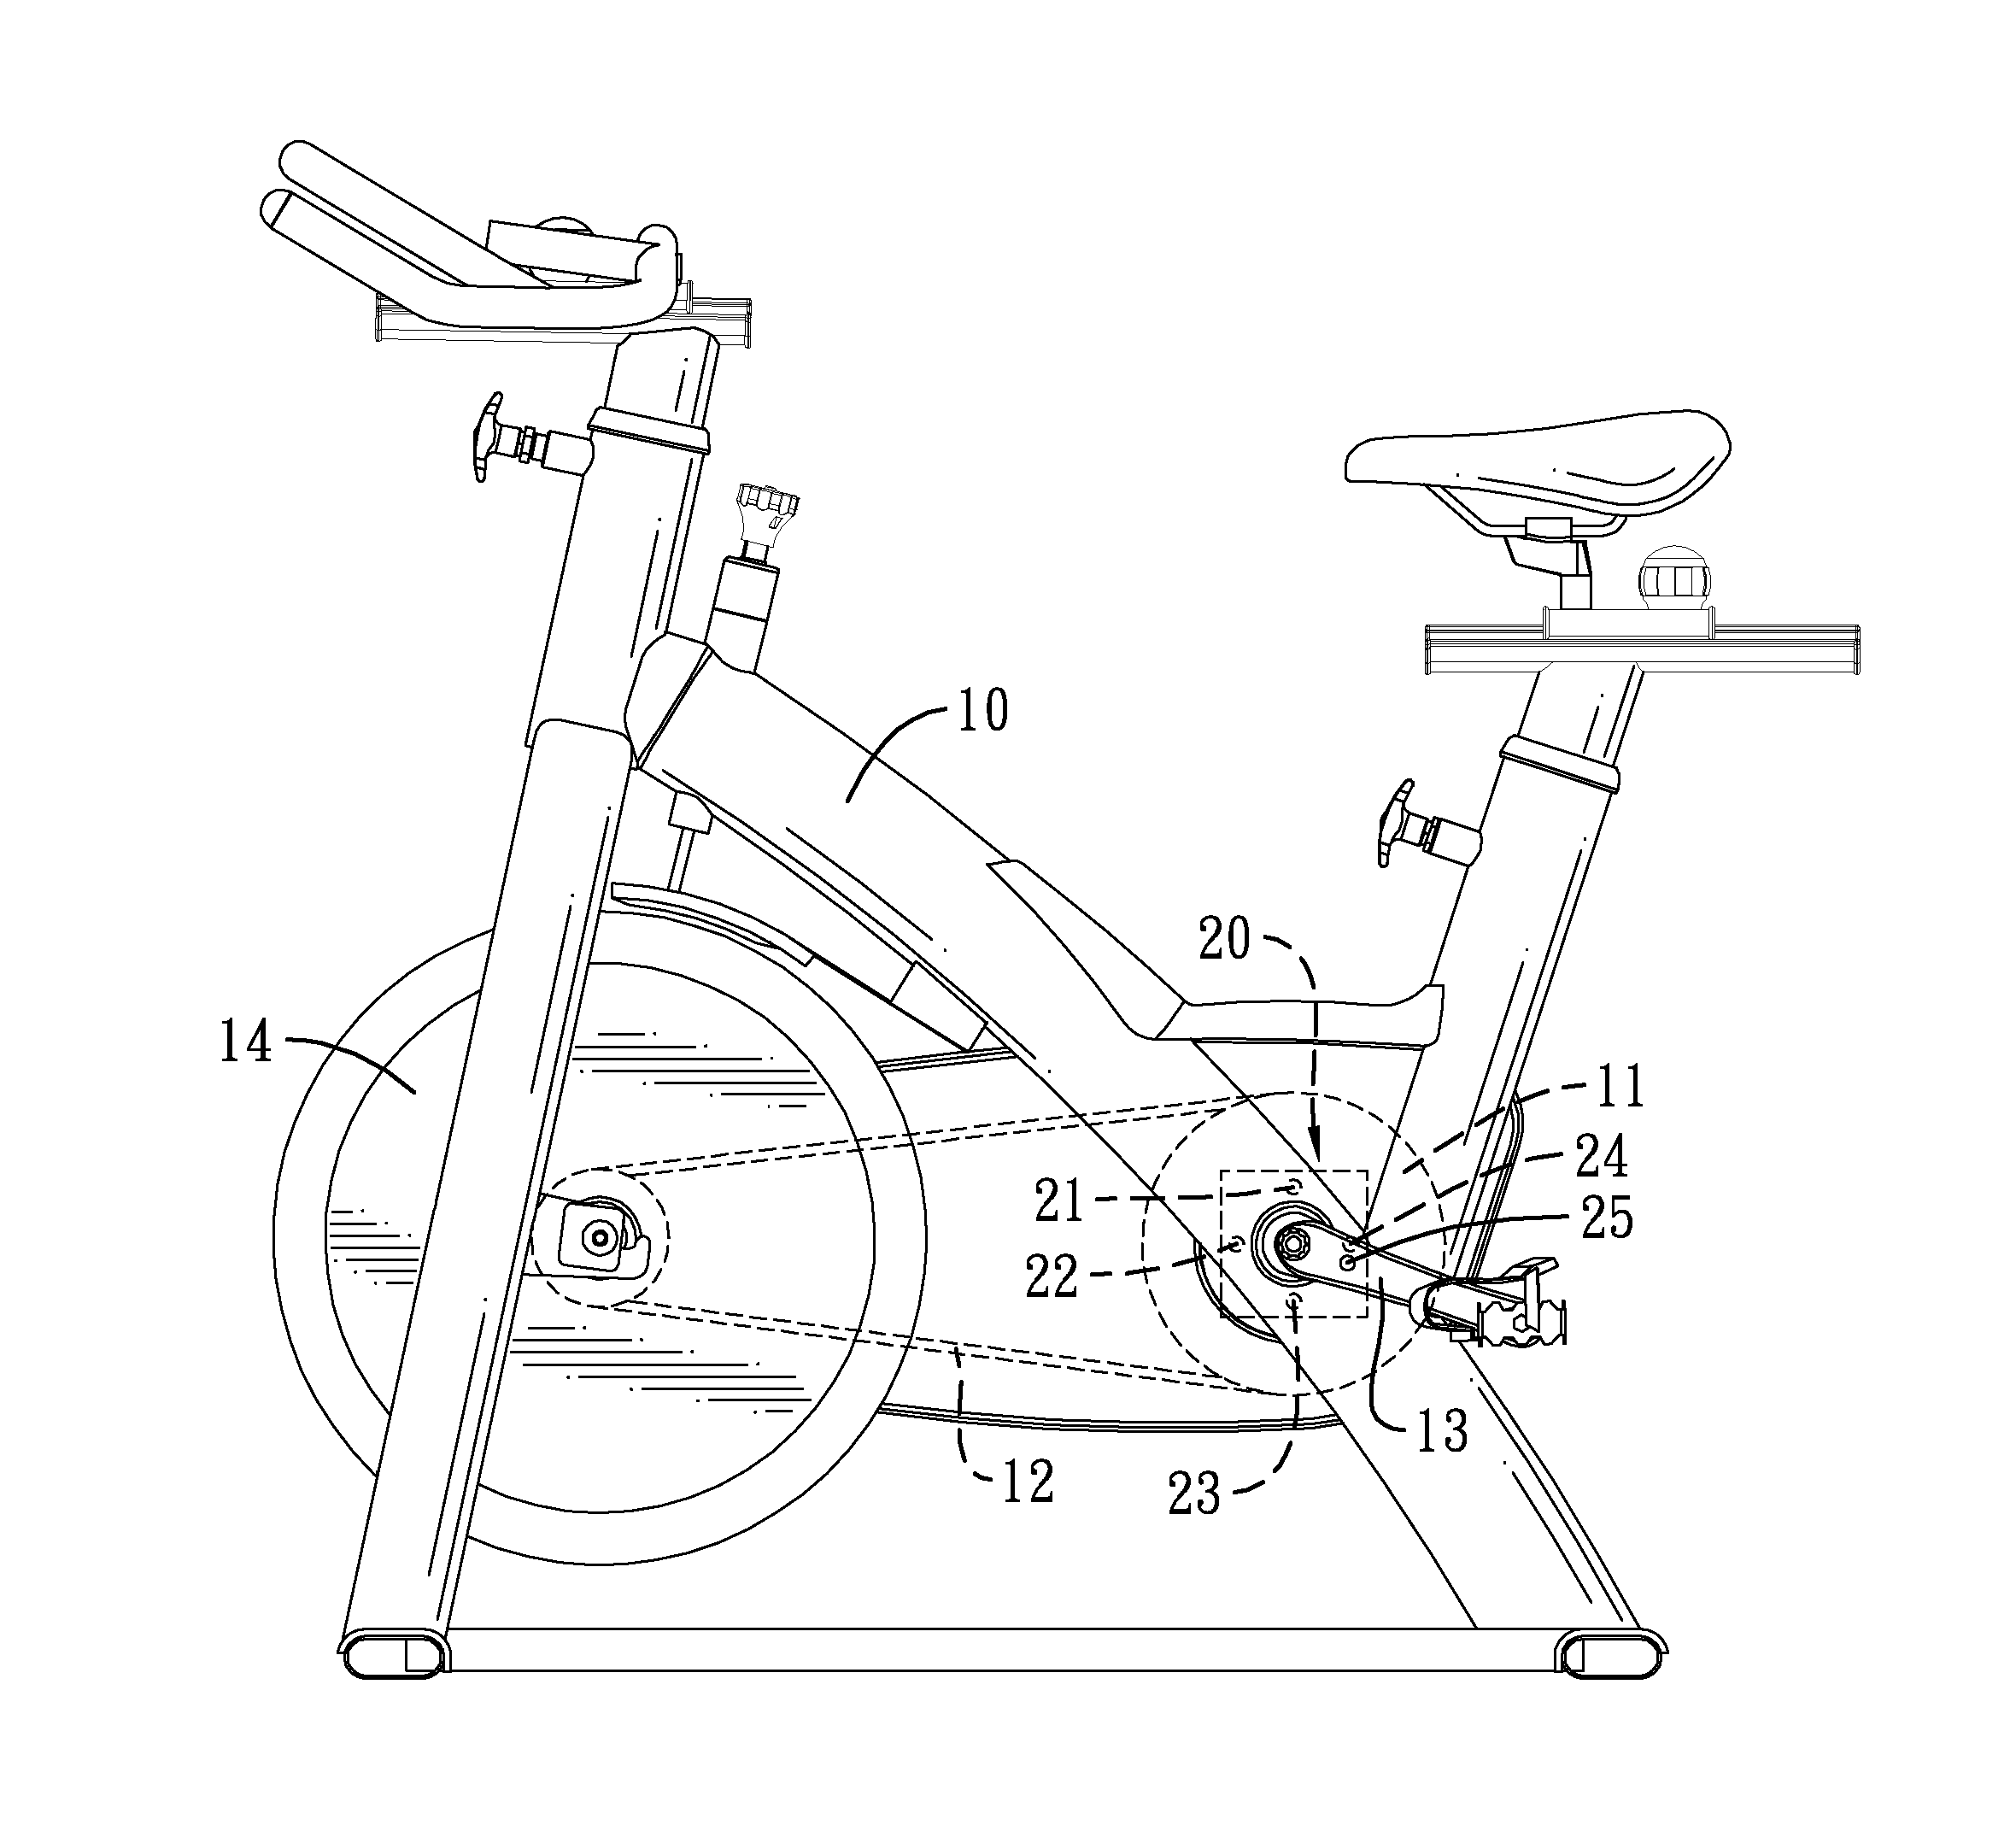 Detection apparatus of a traning machine